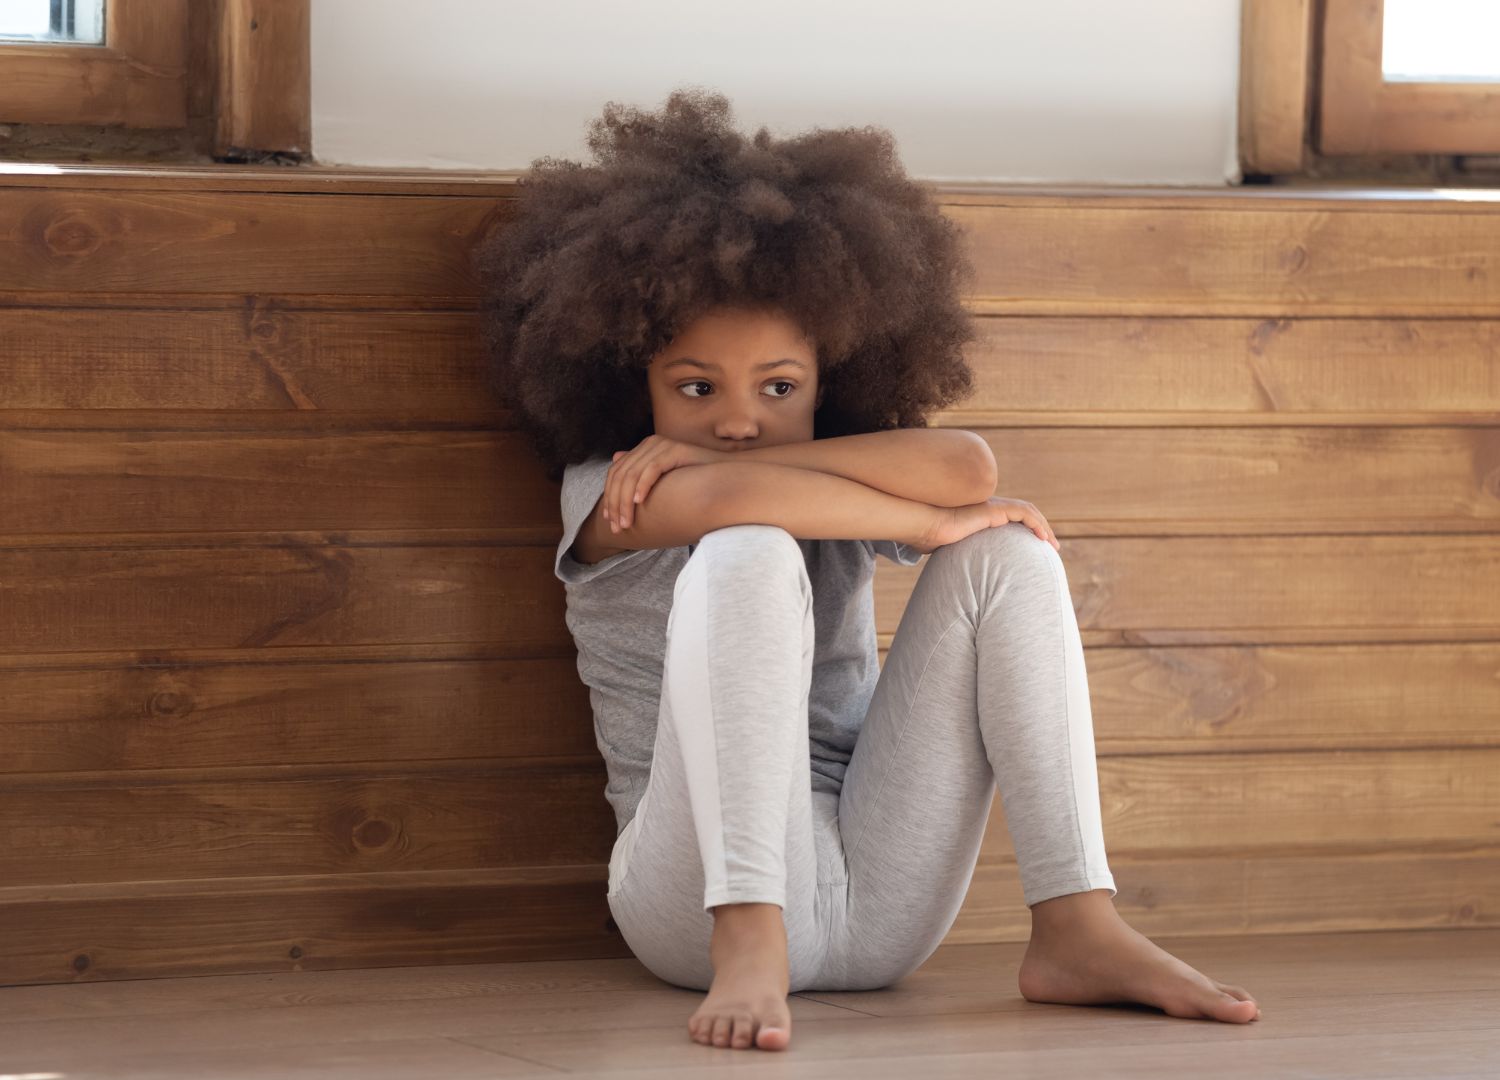 Children can suffer from depression too - Do not miss the signs